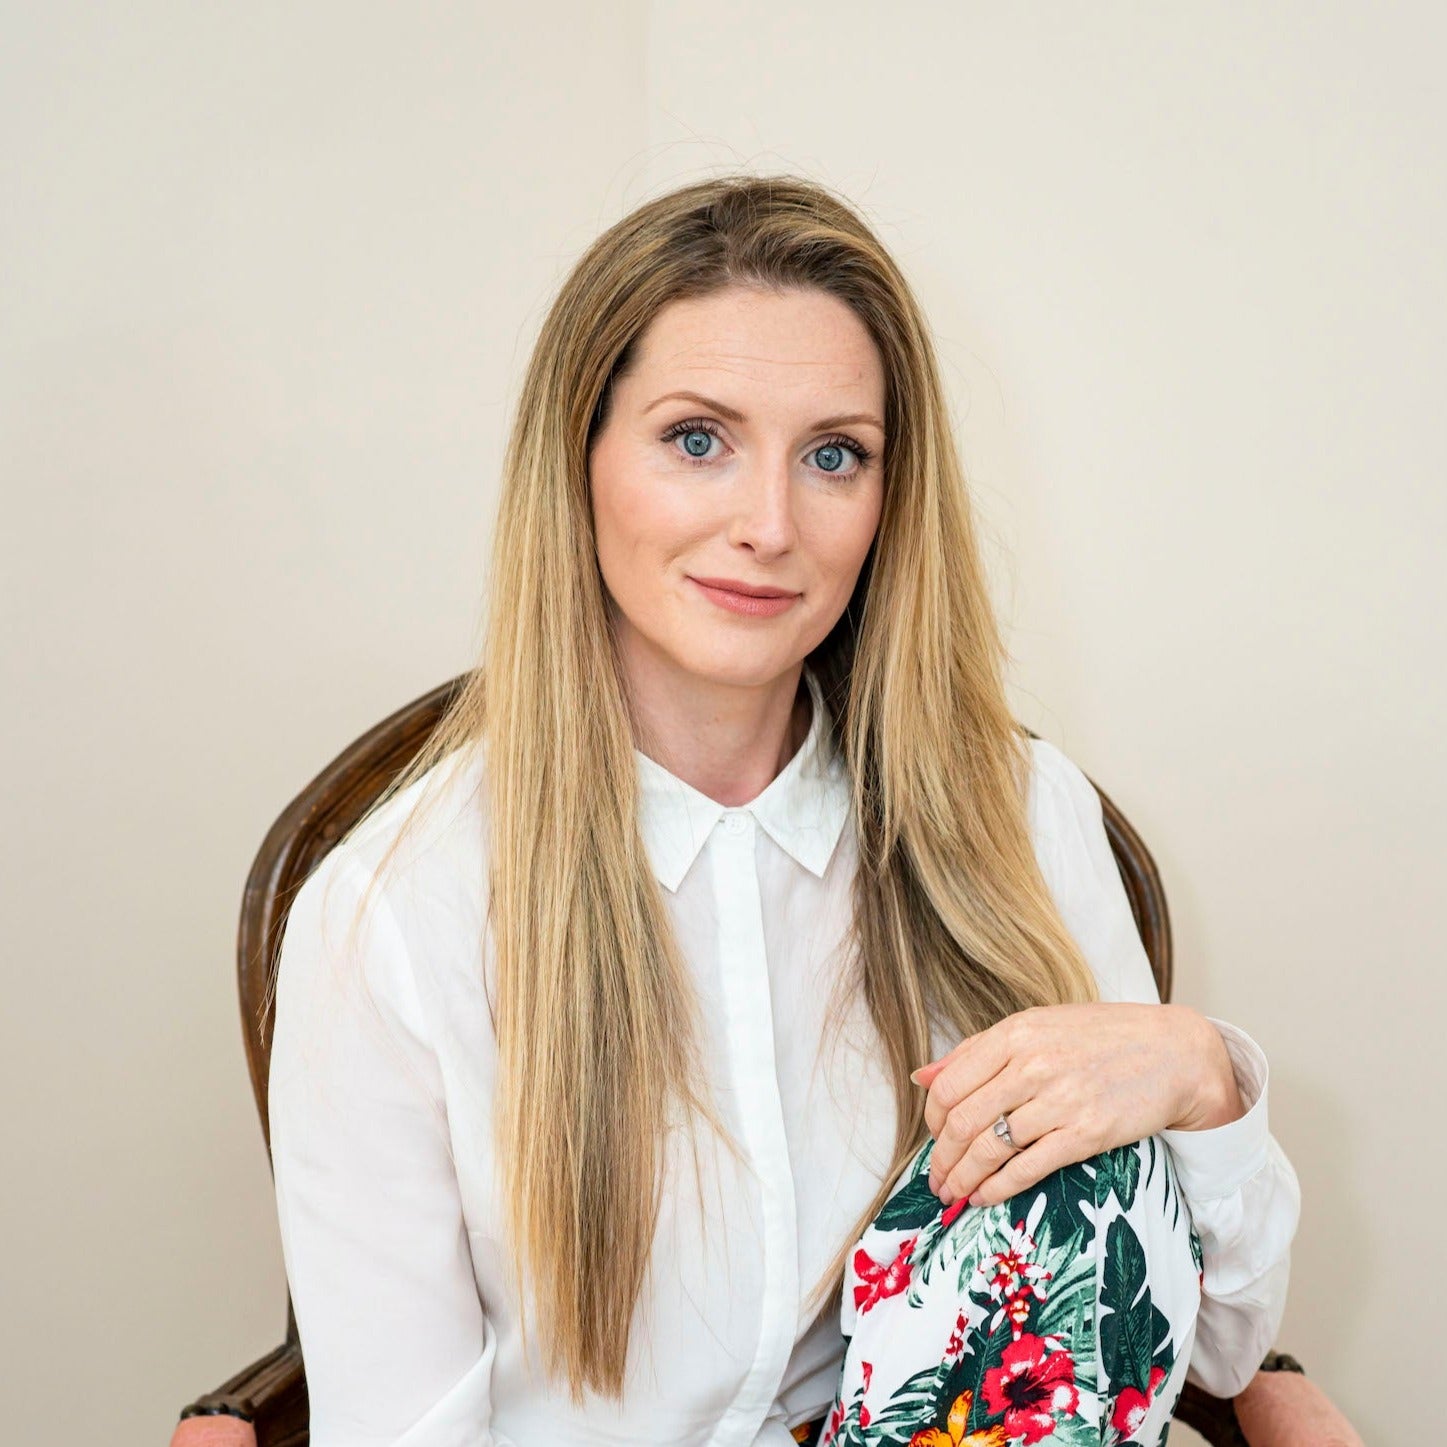 Bowe Organics Founder Diane is photographed sitting in a wooden chair with arm rests and a coral fabric. Diane has long blonde hair and bright blue eyes and she's seen with one leg raised up to her torso in a sitting position with her hand resting on her knee. Diane is wearing a white collared shirt and printed trousers with tropical flowers on them